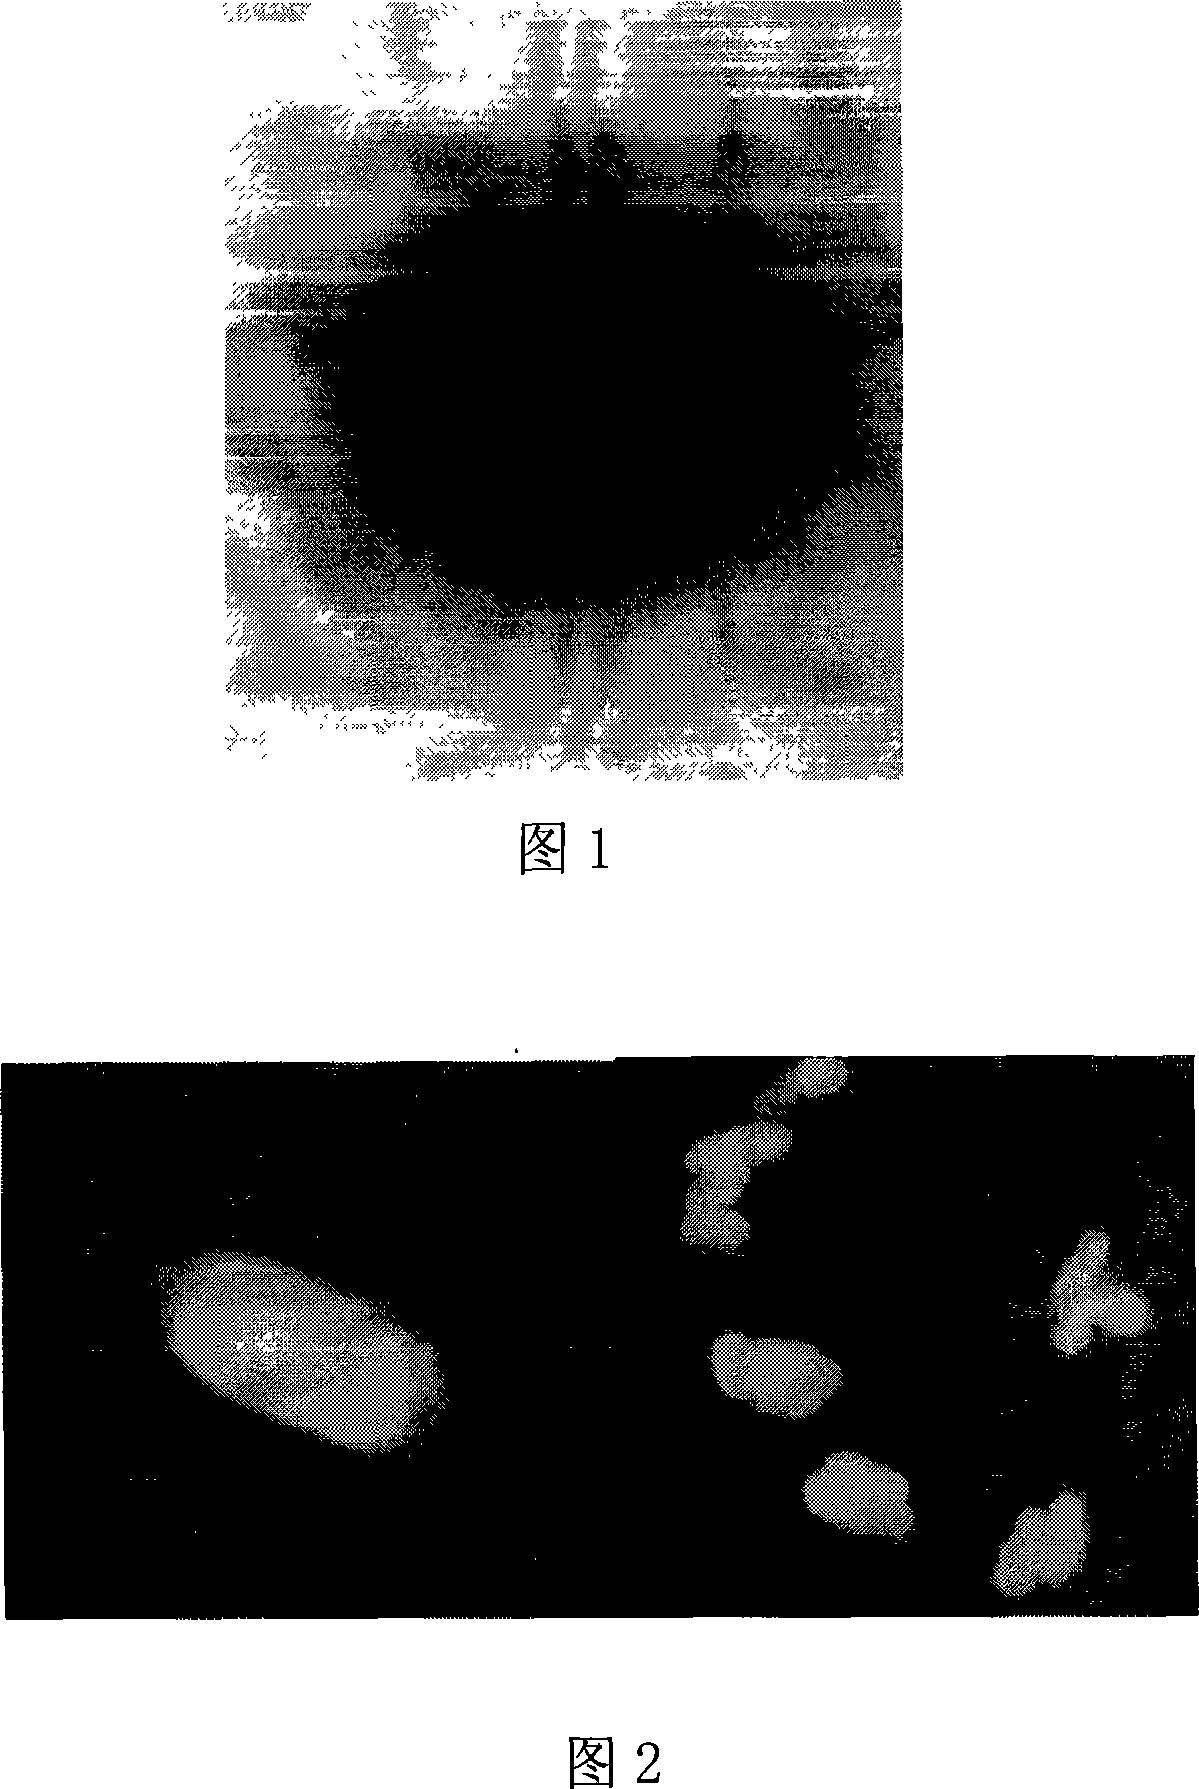 Sulfate reduction bacterium with polyacrylamide degradation function and application thereof